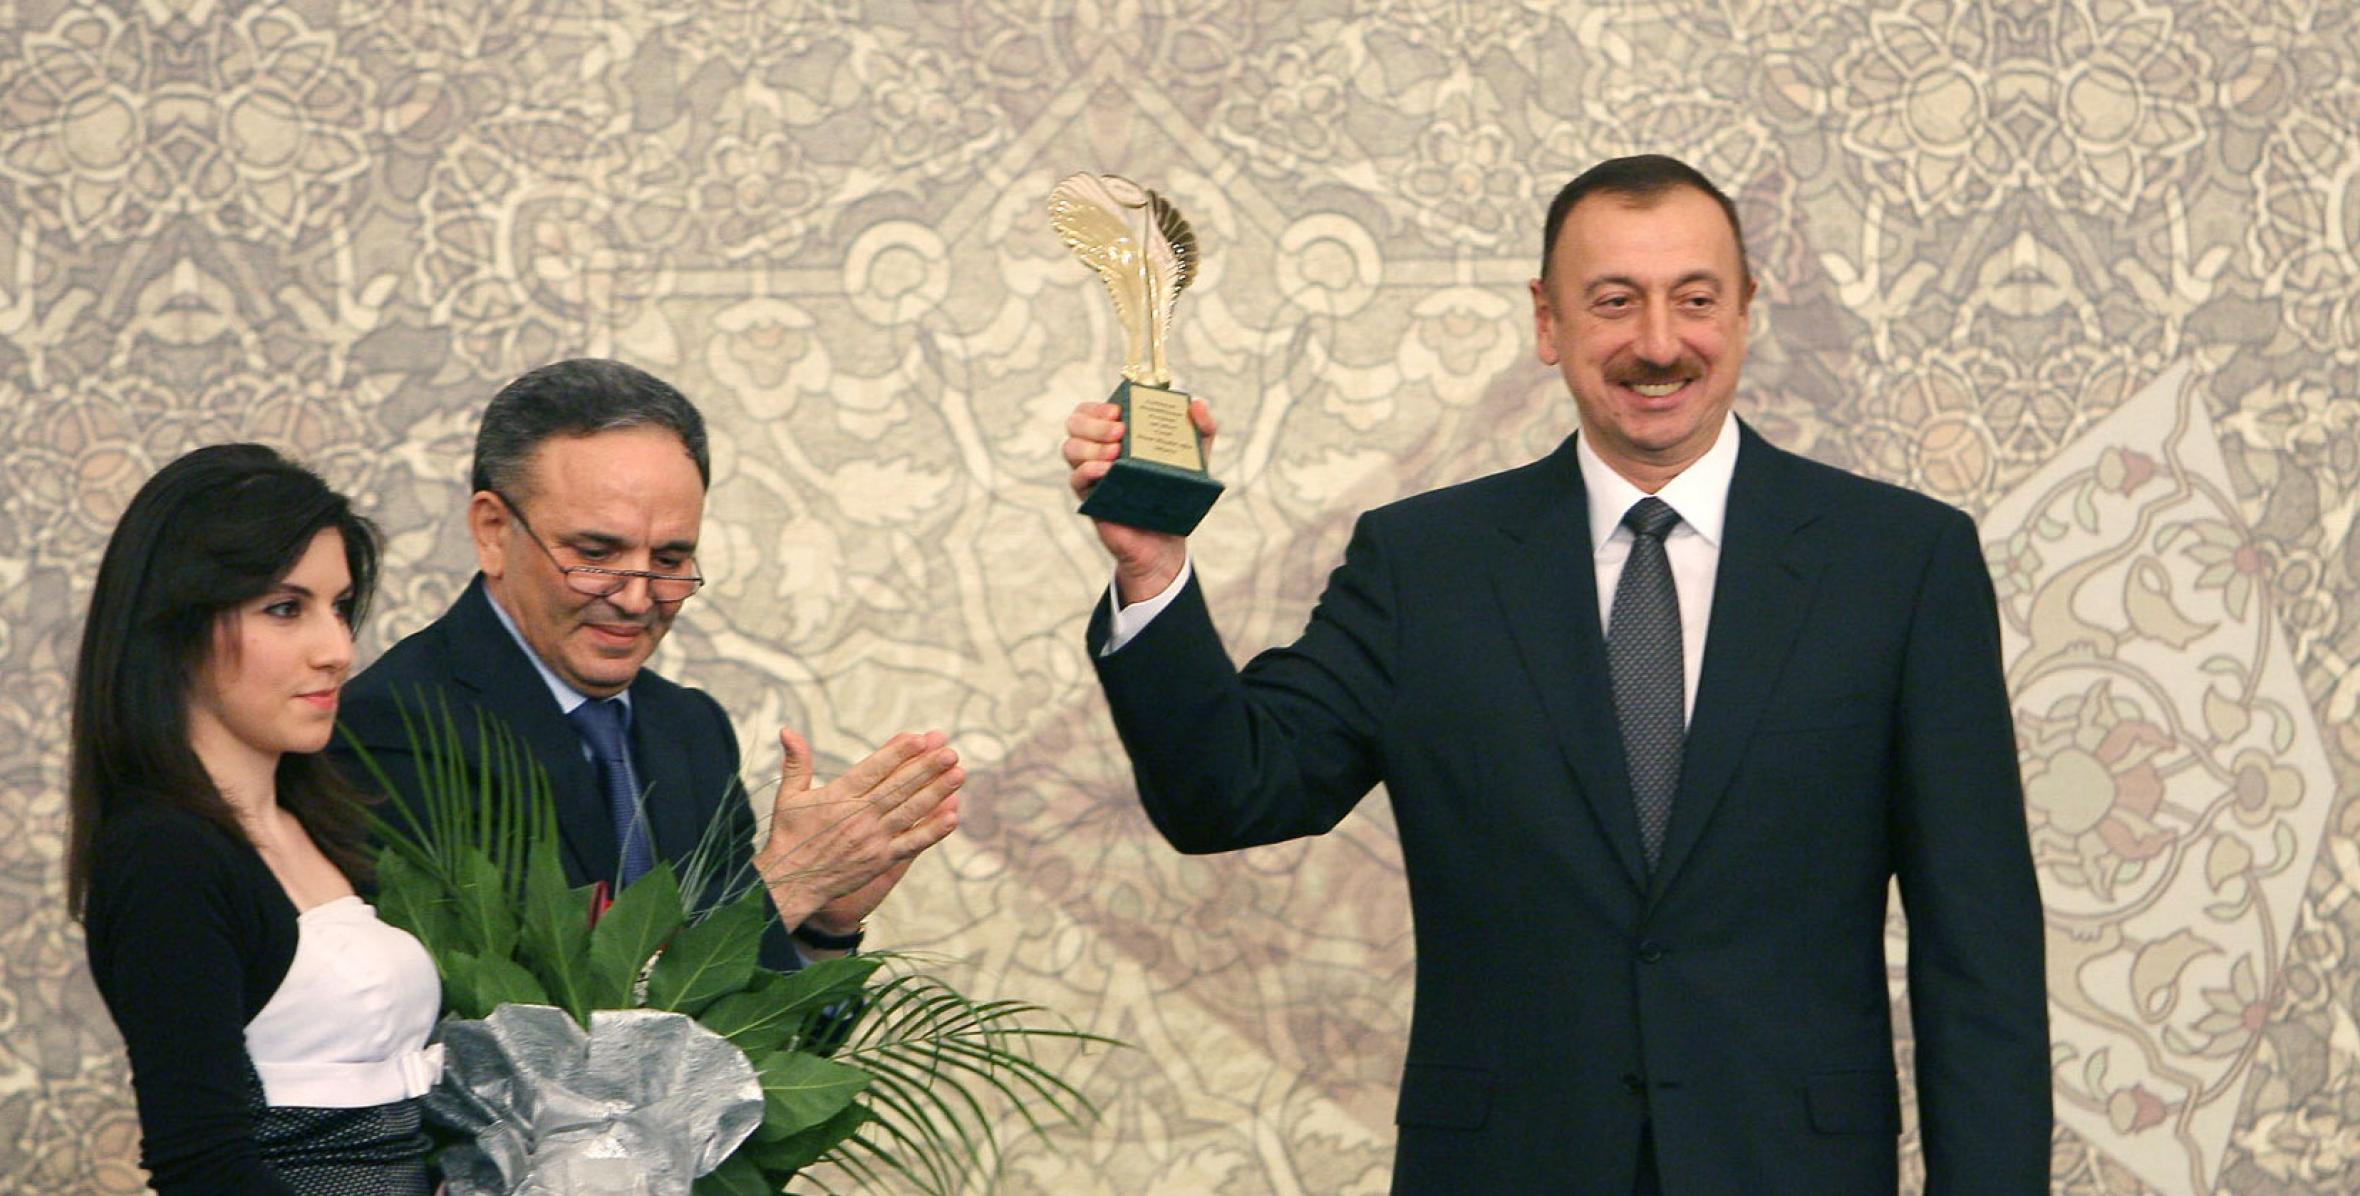 Ilham Aliyev was presented the “Friend of Journalists” Award